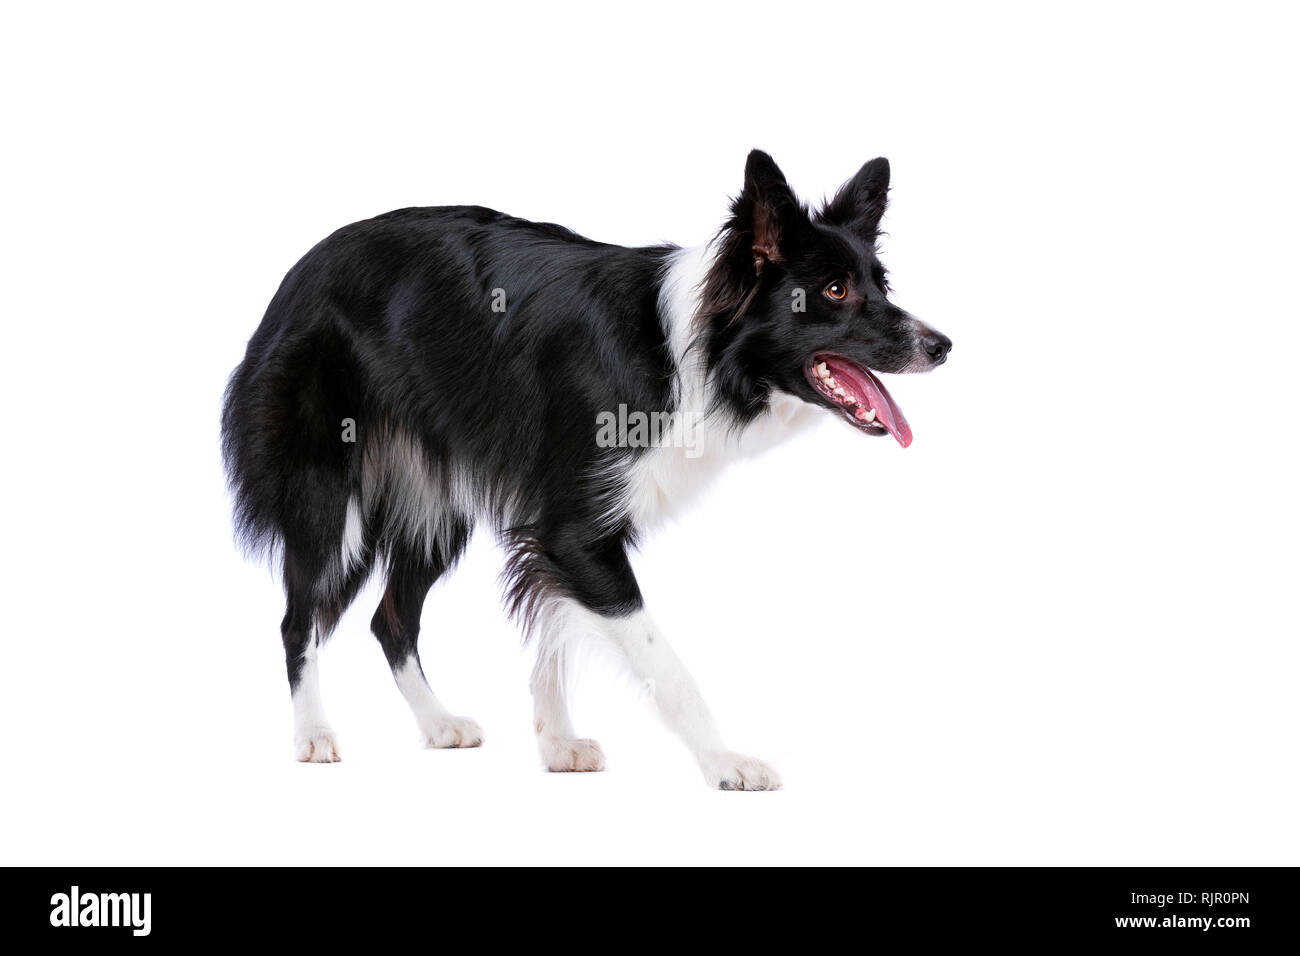 Border collie dog standing in front of a white background Stock Photo